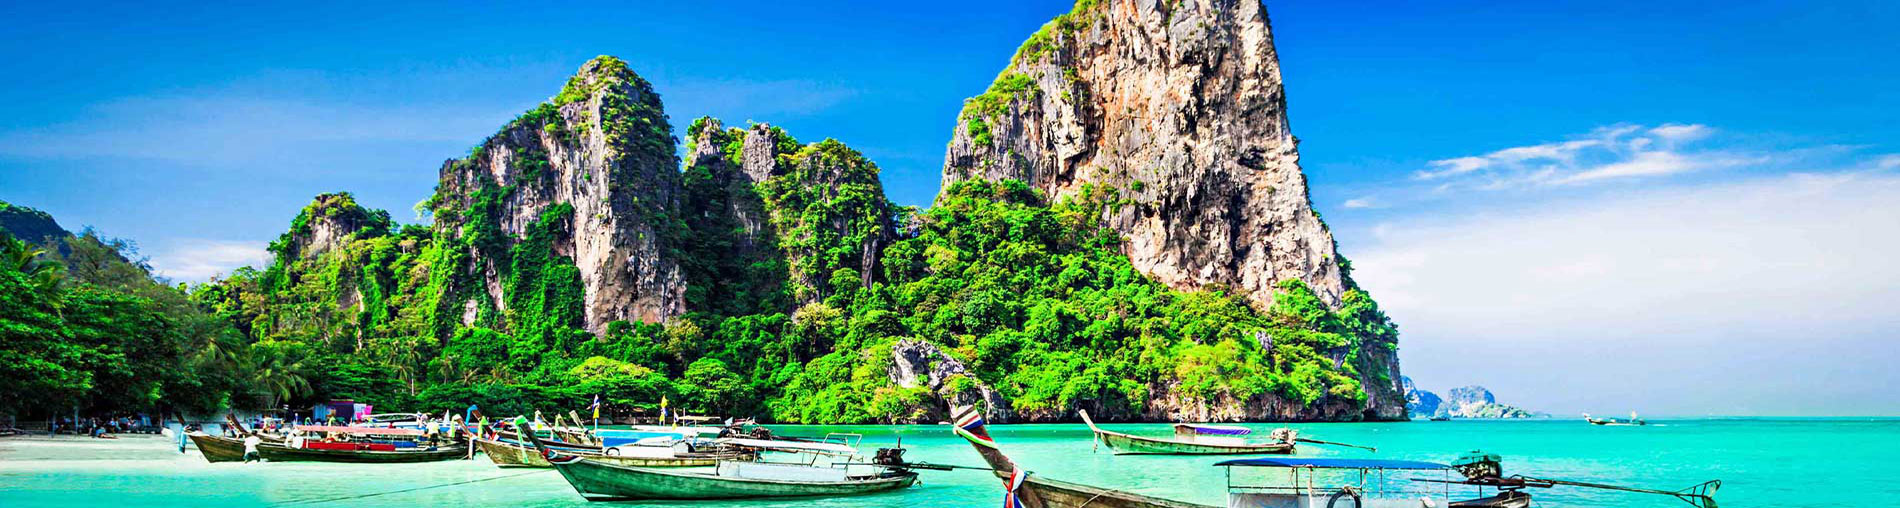 Thailand Holiday Package - 7 Nights